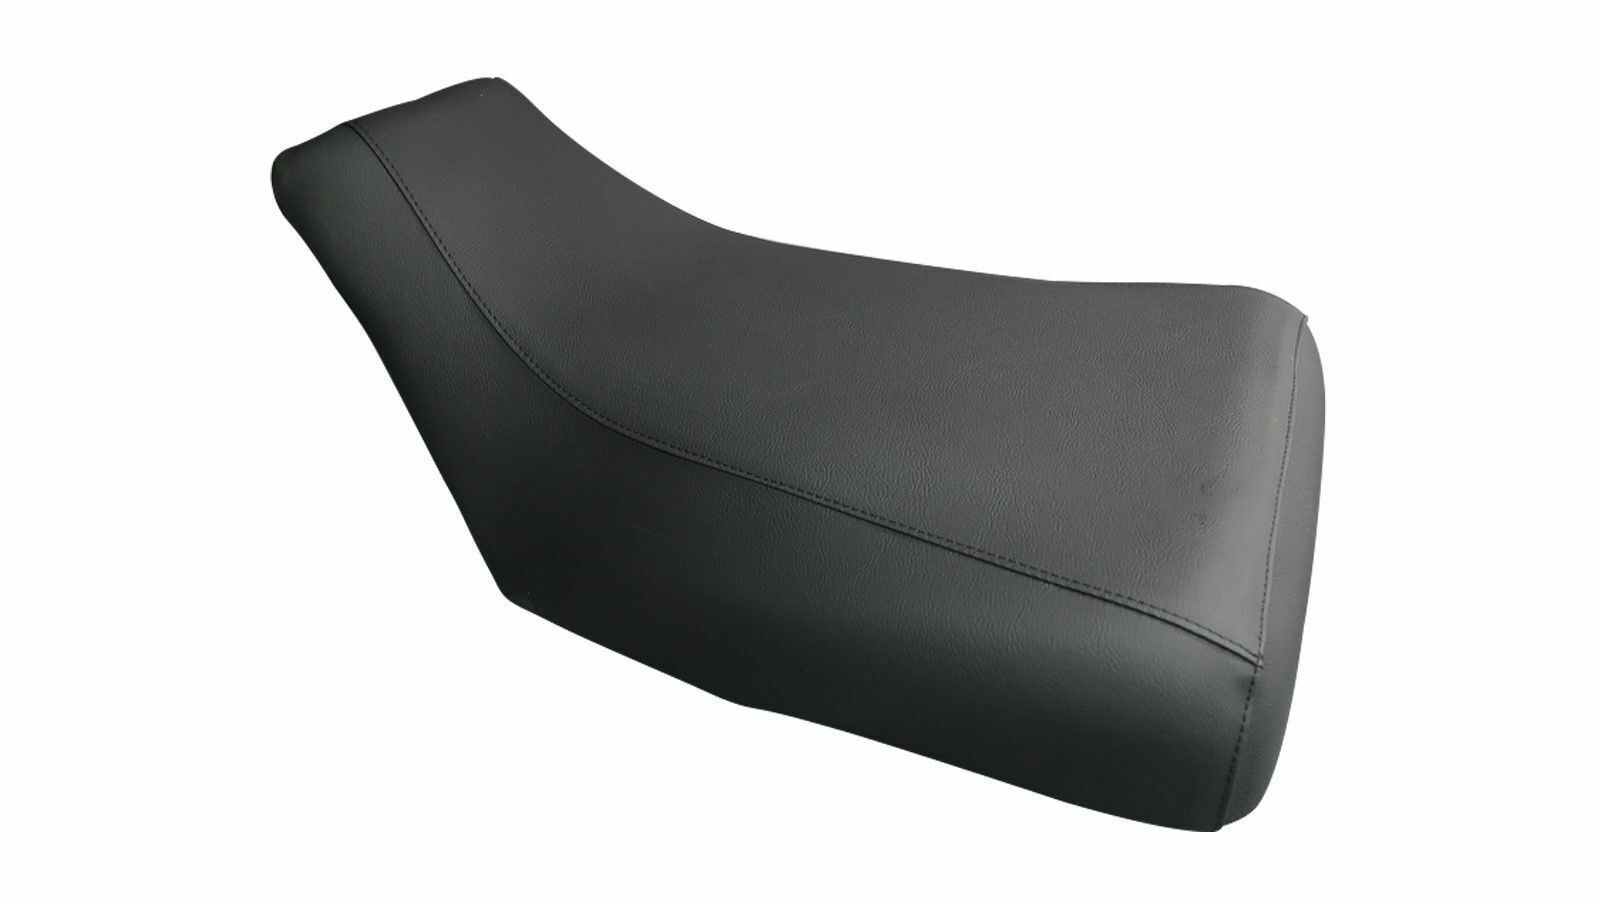 Primary image for Honda Rancher 350 Seat Cover 2004 To 2006 Standard Black Color TG20186705